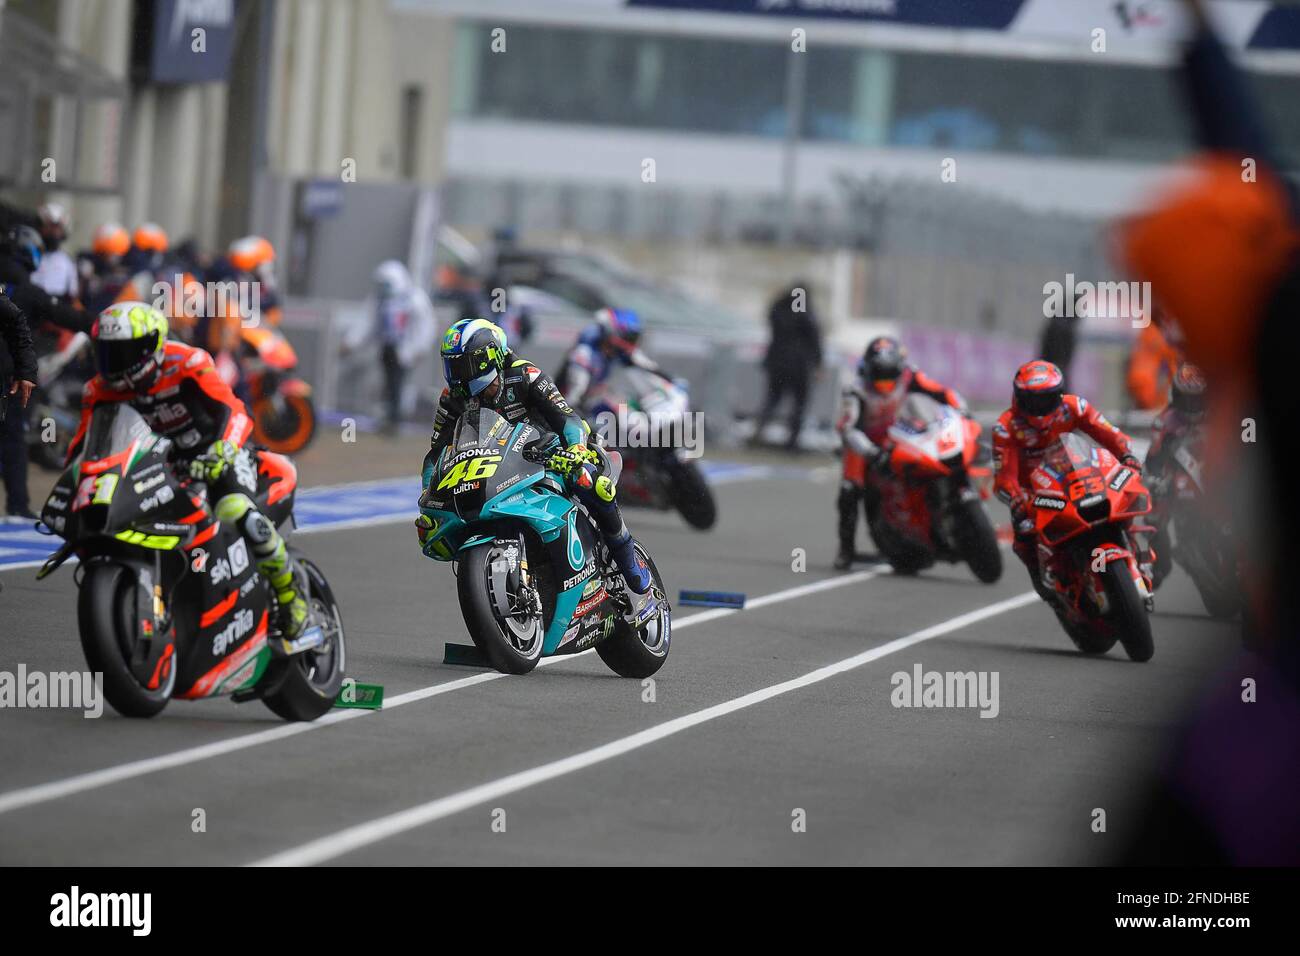 Le Mans, France. 16th May, 2021. Races of MotoGP SHARK Grand Prix of France  at Le Mans circuit, Francia May 16, 2021 In picture: Change motos on pit  Carreras del Gran Premio